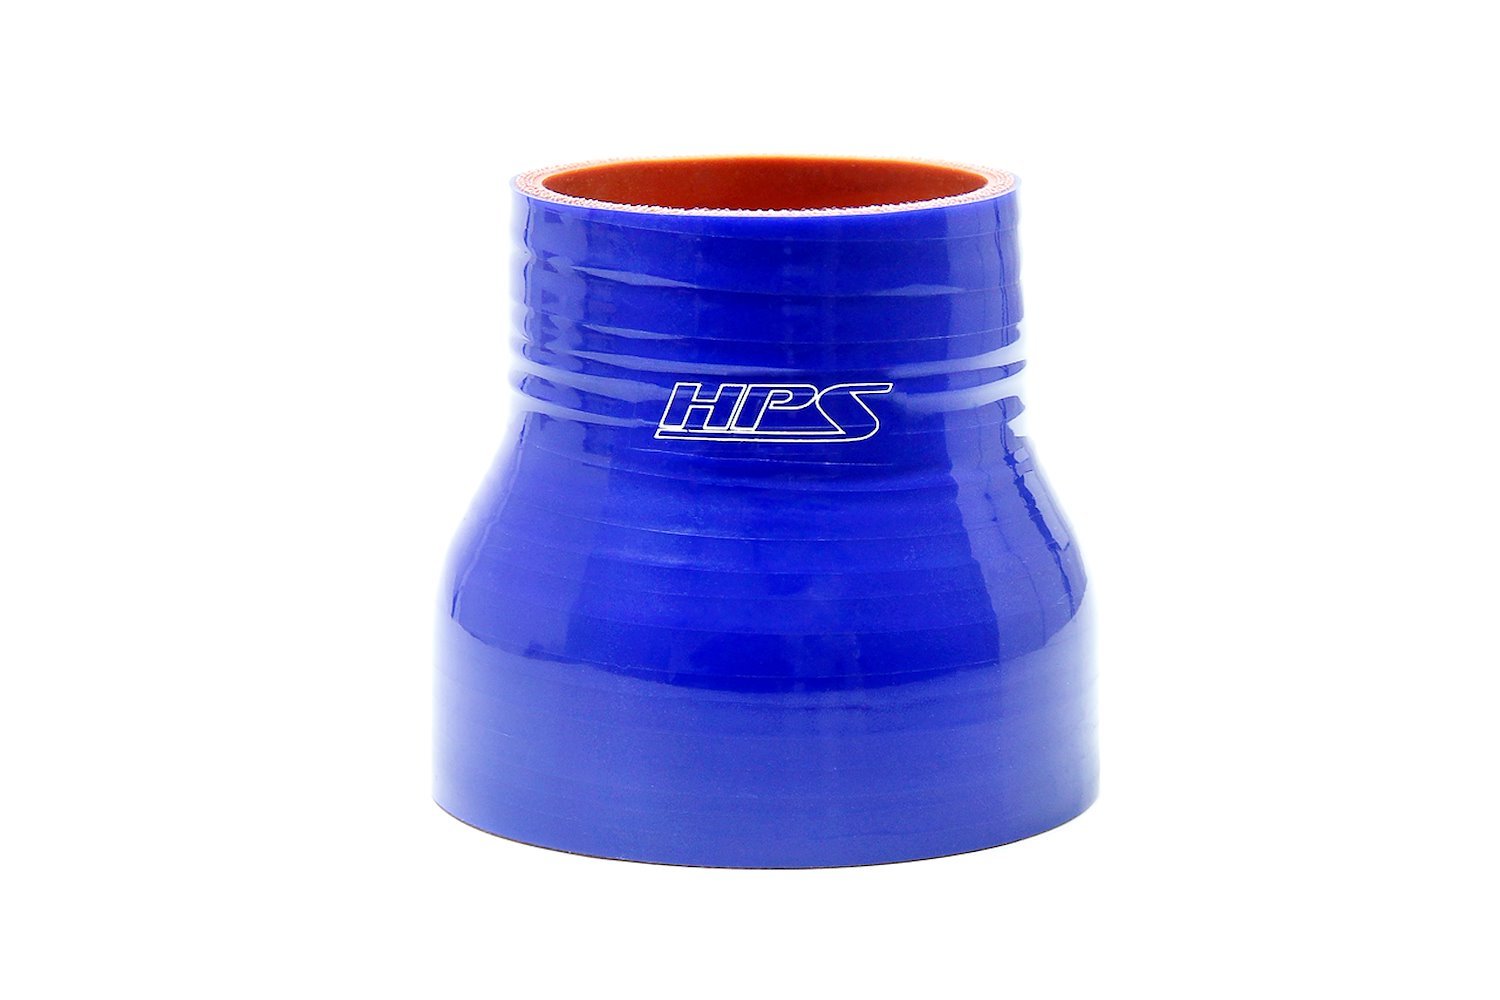 HTSR-225-300-BLUE Silicone Reducer Hose, High-Temp 4-Ply Reinforced, 2-1/4 in. - 3 in. ID, 3 in. Long, Blue